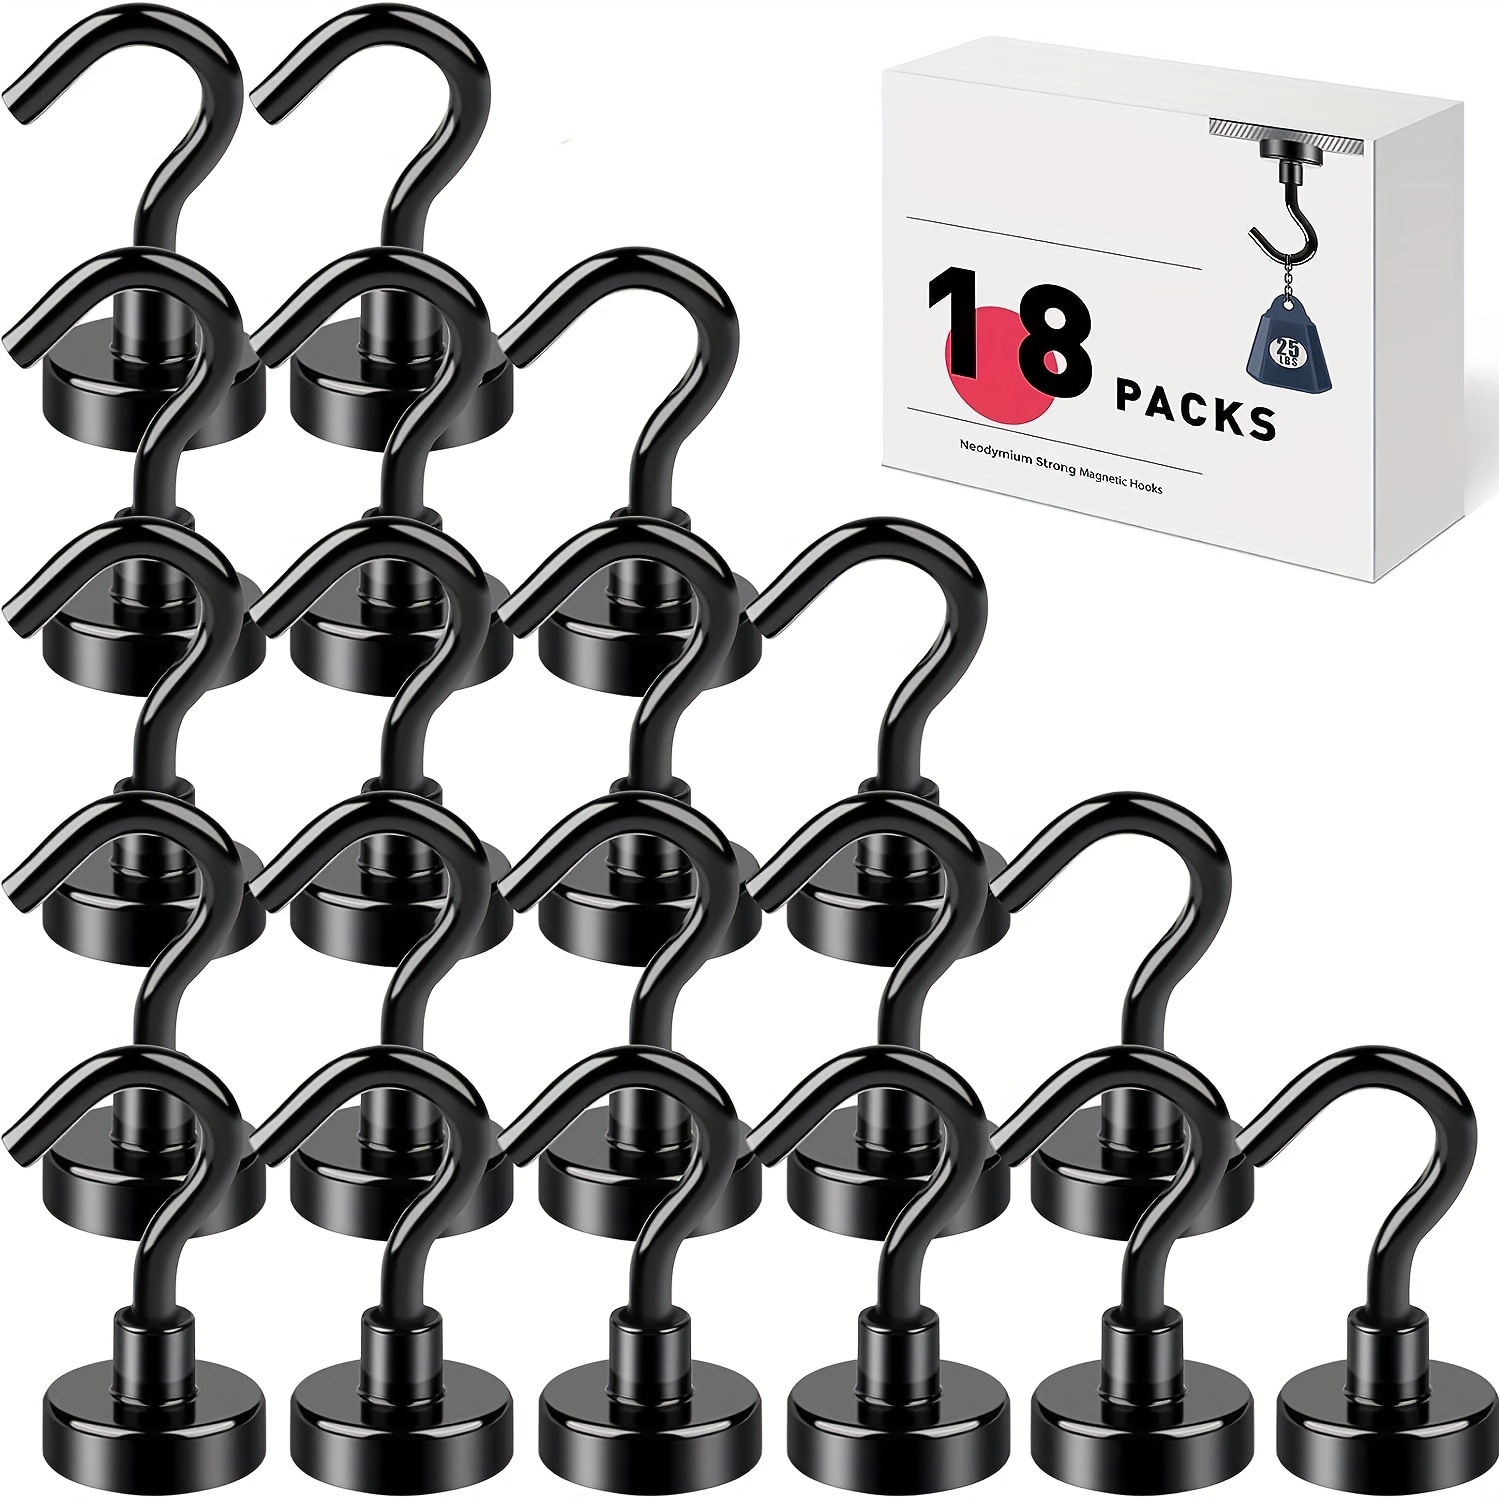 

18pcs Of Magnetic Hooks, 25 Lbs (approx. 11.3 Kg) Black Magnet Hooks, Suitable For Cruise Cabins, Refrigerators, Ceilings, Offices, Galleys. Bbq, Garage